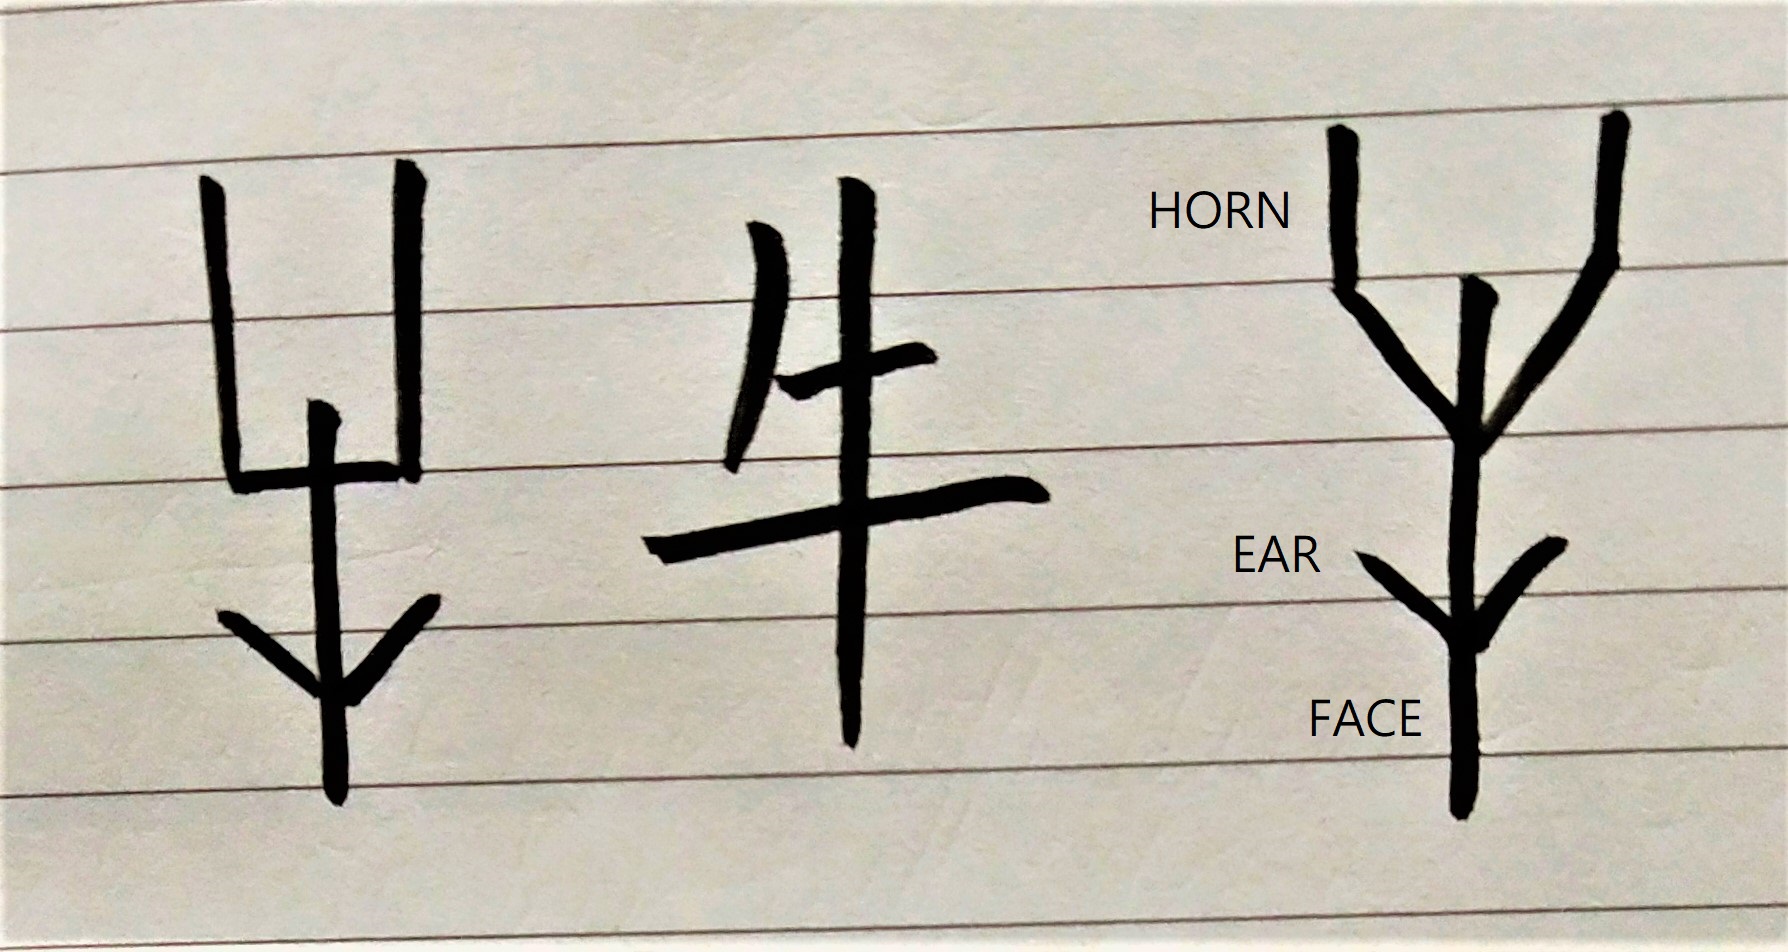 Chinese character for ox in oracle bone inscriptions. The horn, face and ears of ox are clearly shown. The modern character for ox is in the middle.